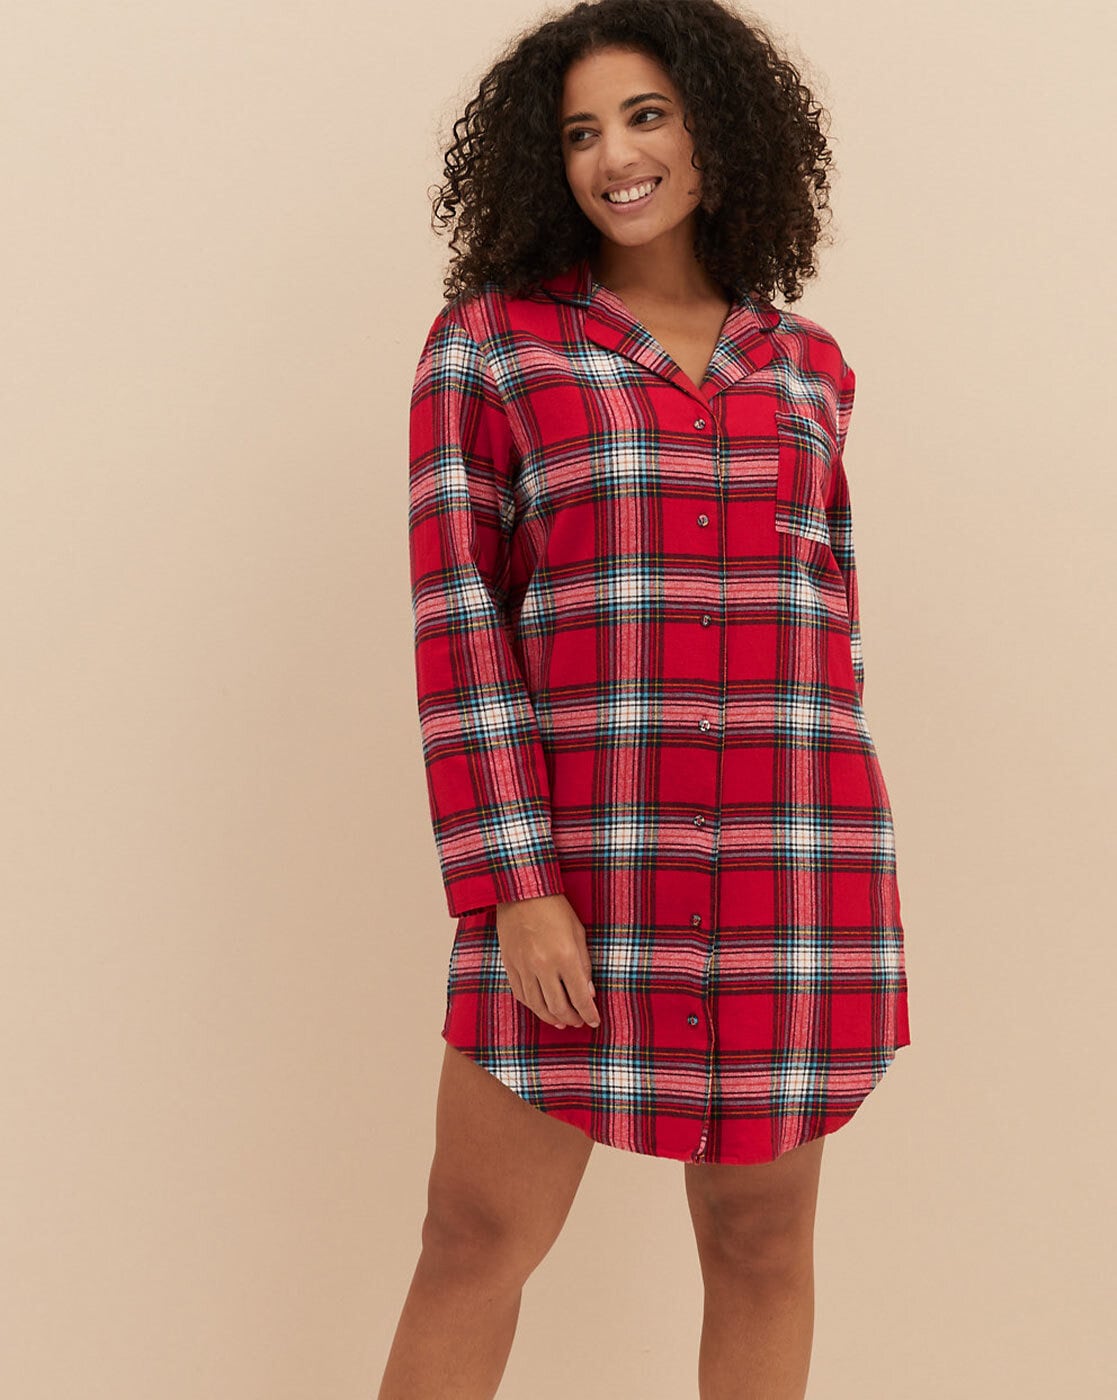 Stylish Checks Night Shirt For Ladies at Rs.1499/Piece in mumbai offer by  Skinvalue